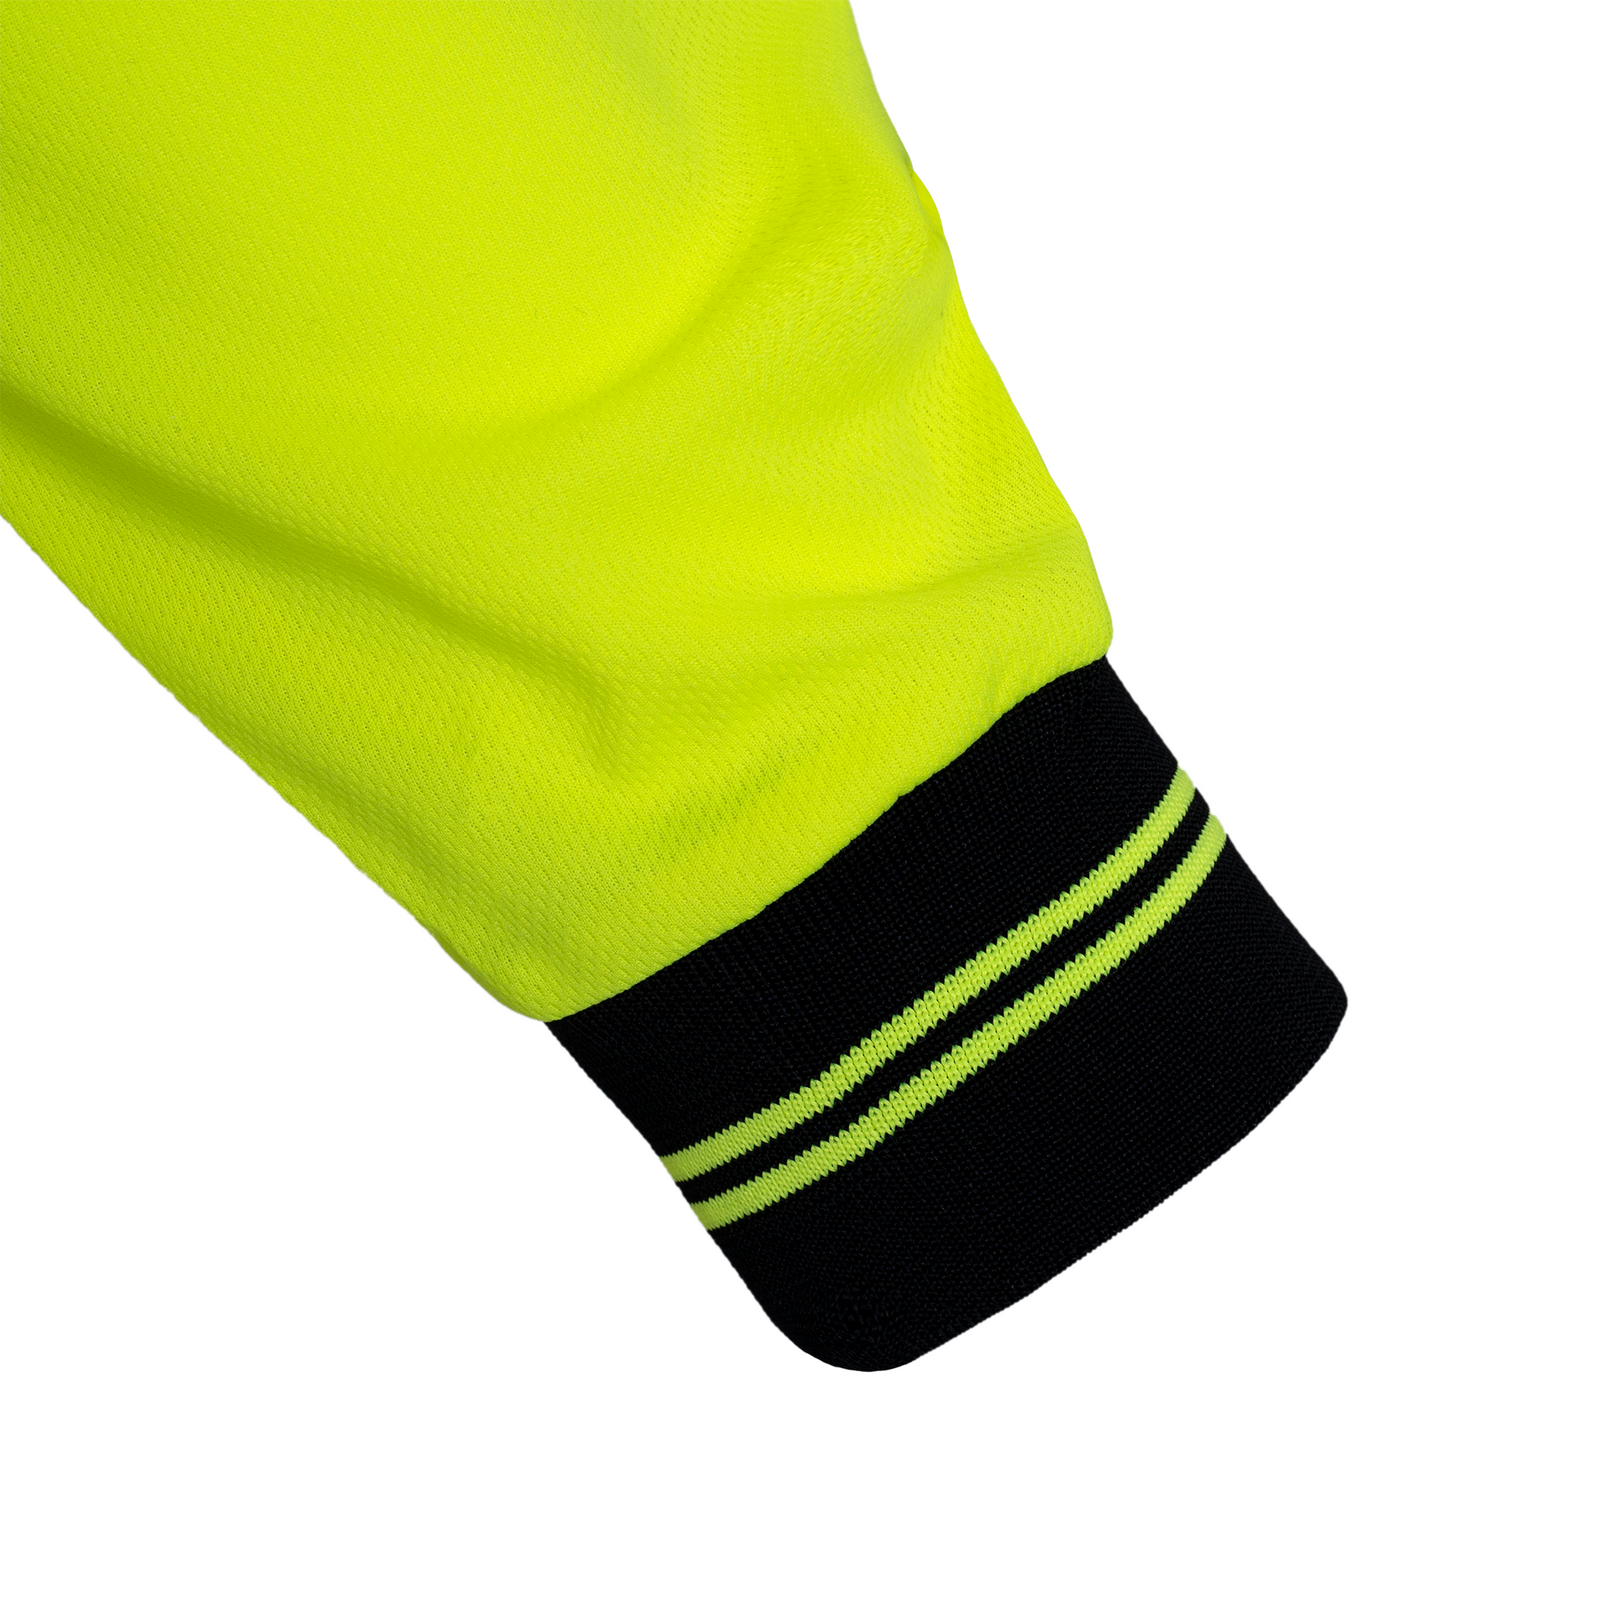 Close up of the sleeve and the knitted cuff on the JORESTECH Yellow long sleeve ANSI reflective Shirt